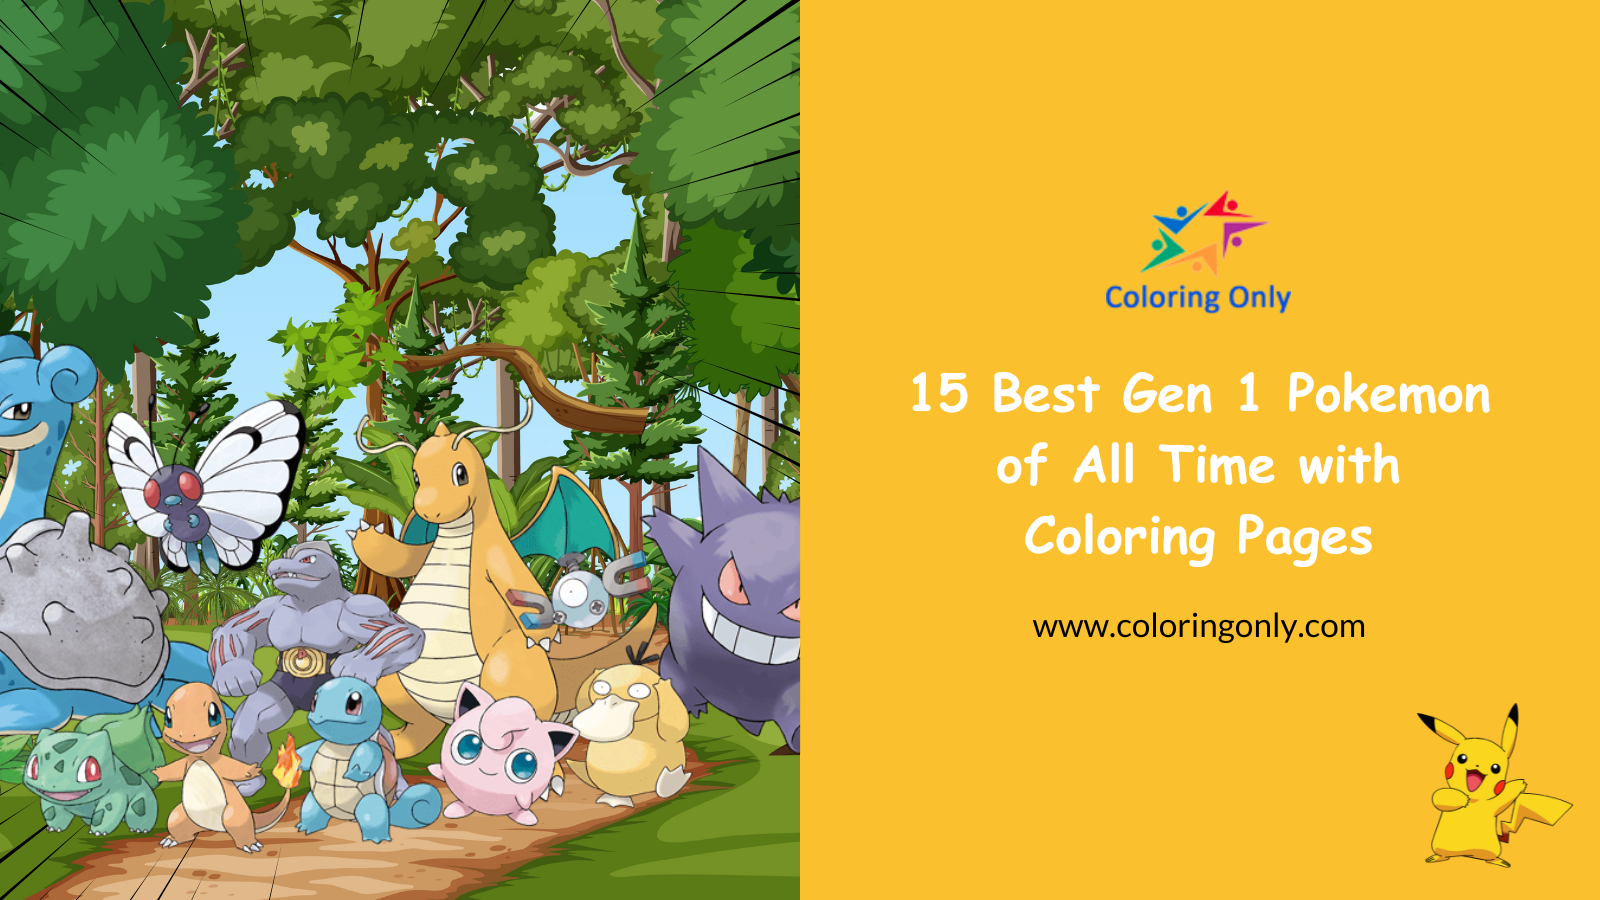 15 Best Gen 1 Pokemon of All Time with Coloring Pages